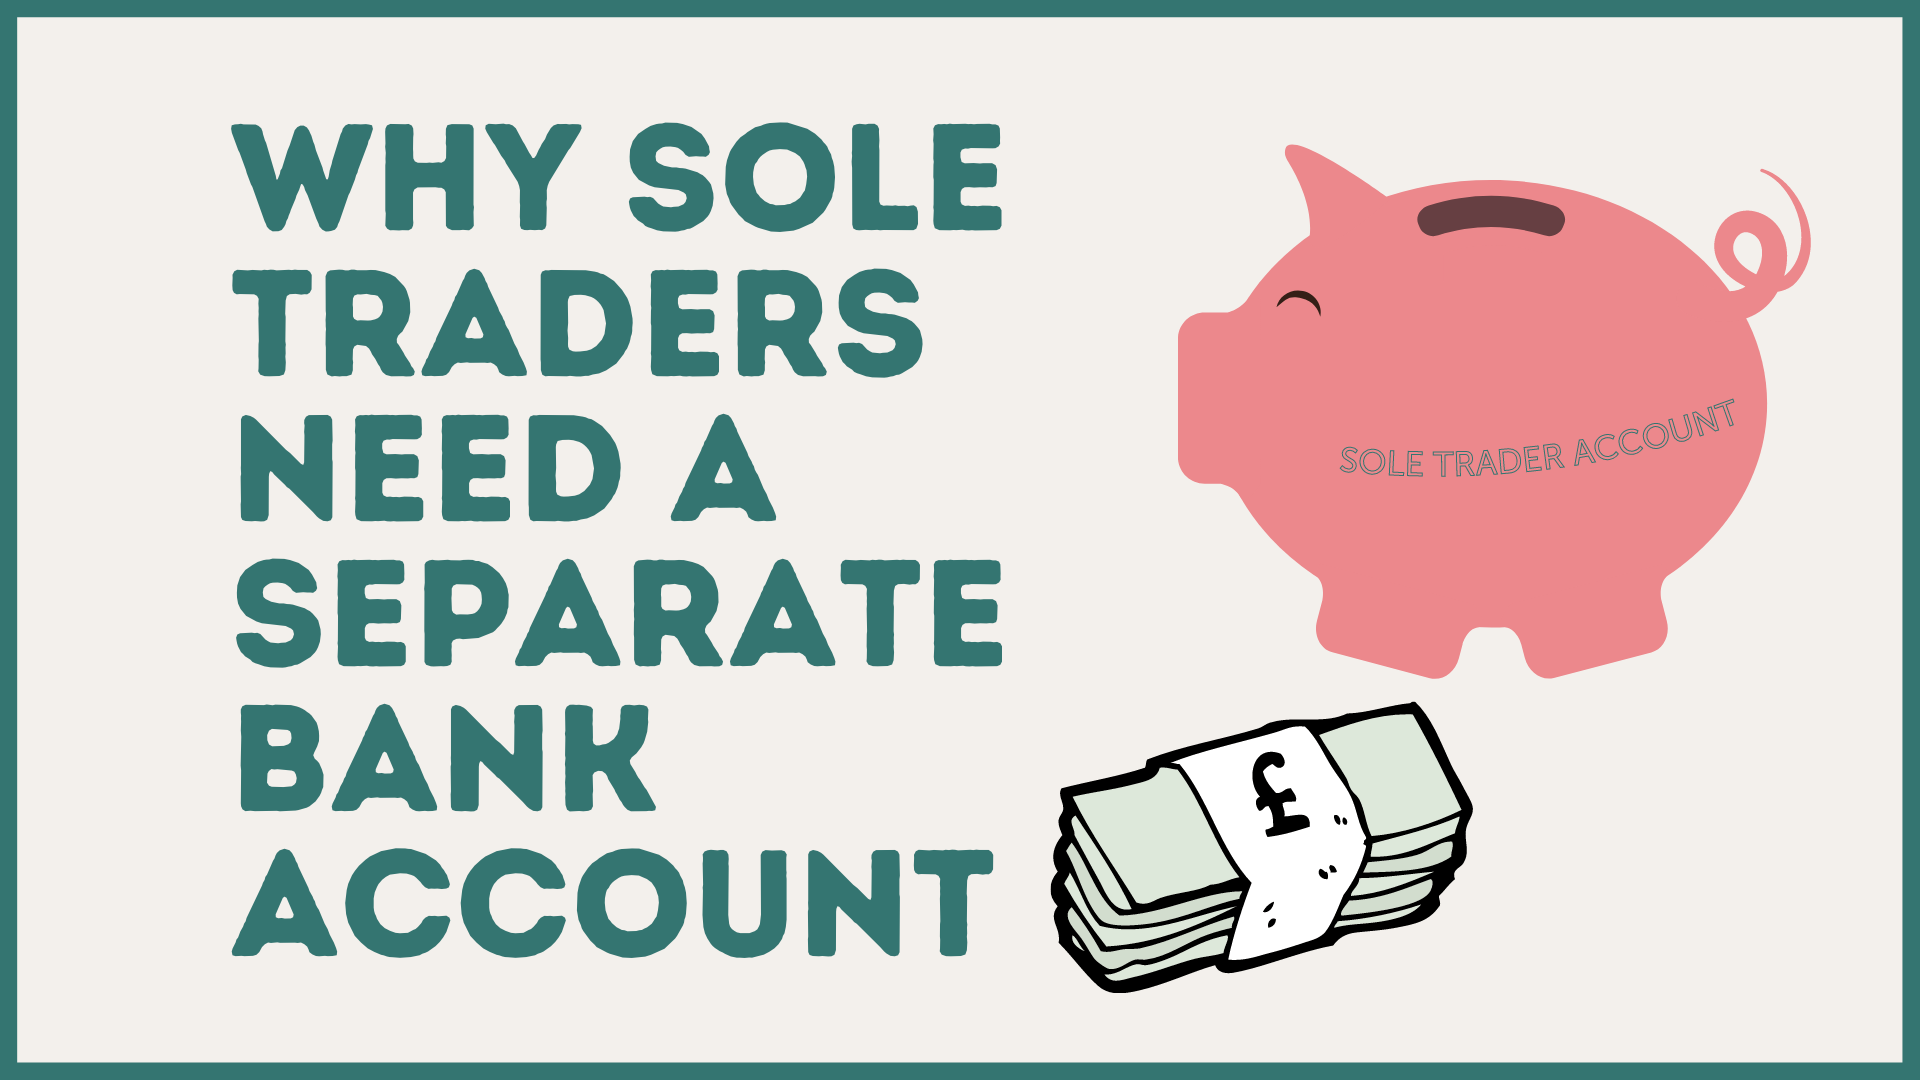 Why sole traders need a separate bank account